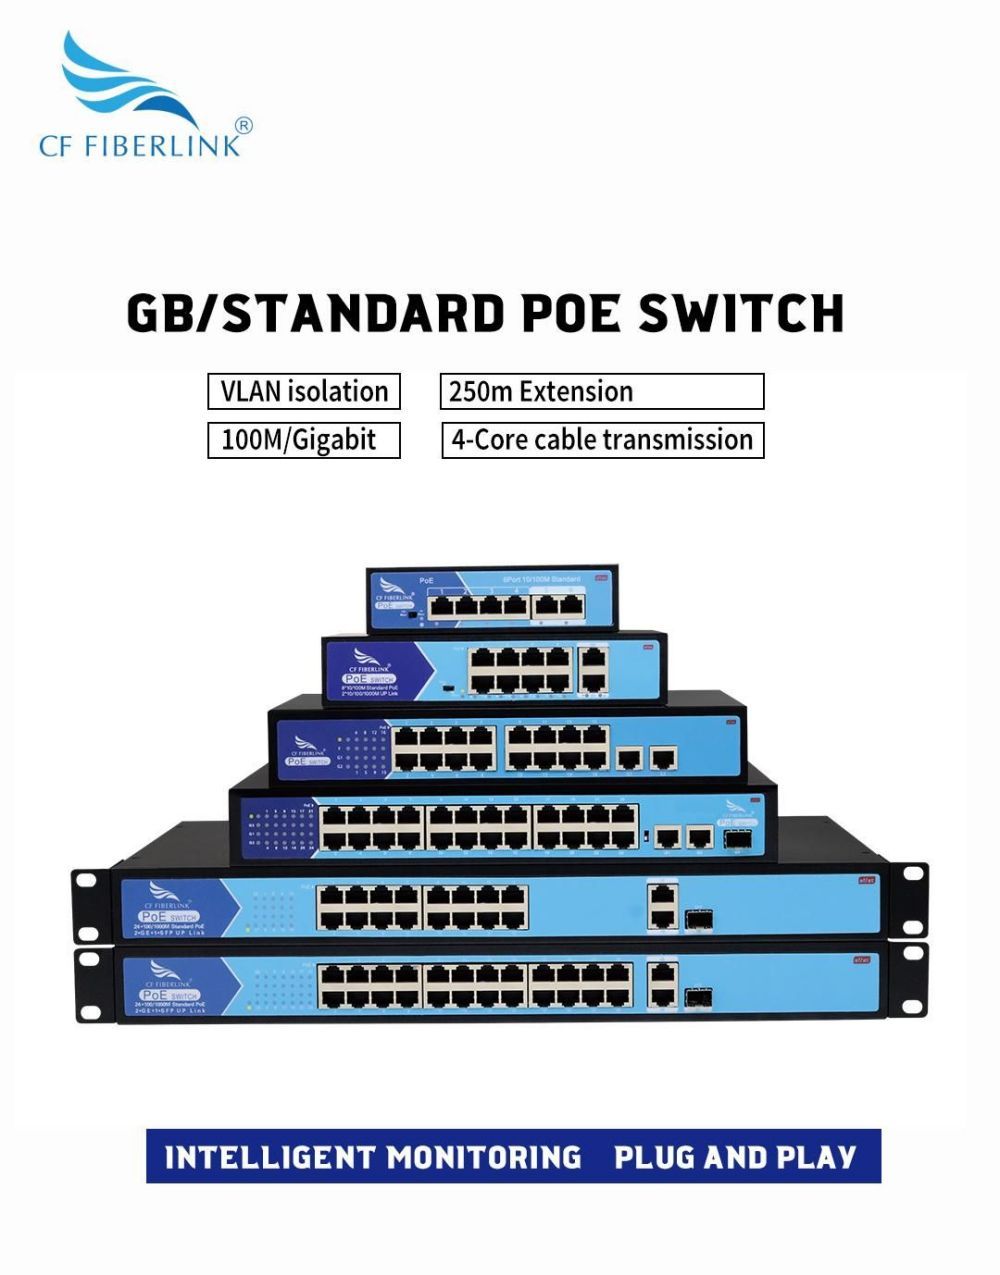 Four connection methods for POE switches